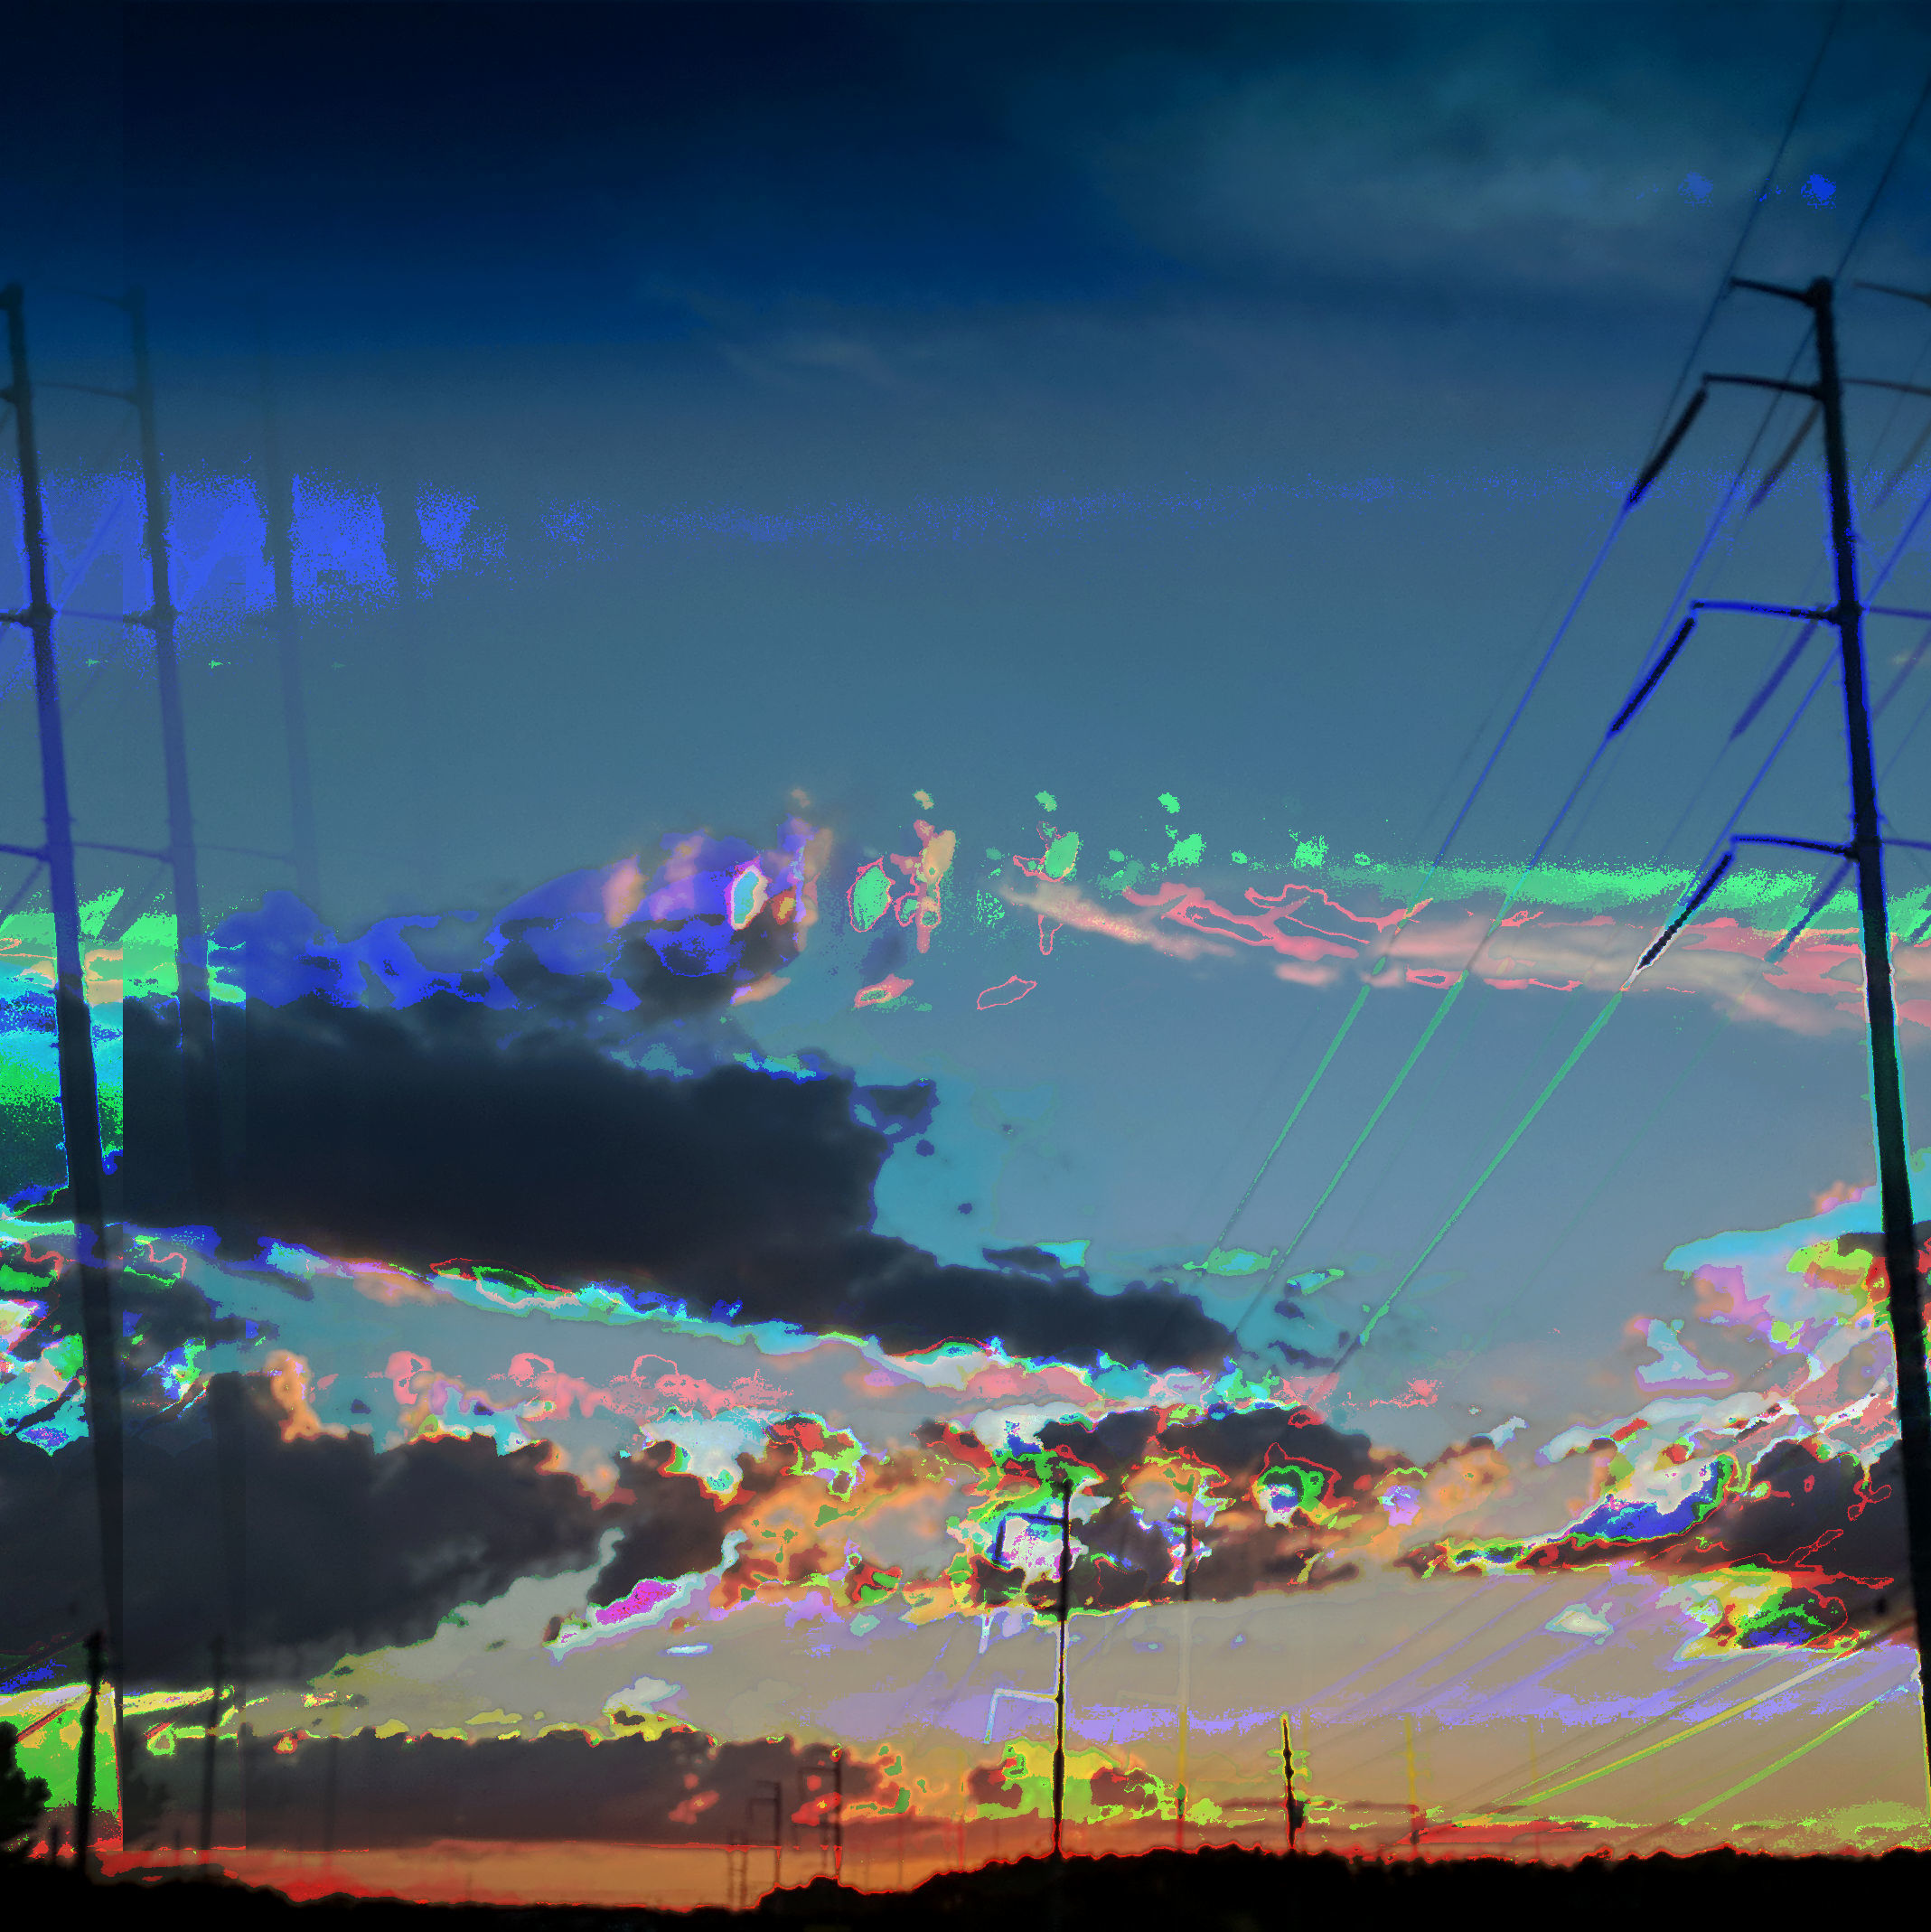 2 sets of powerlines are meeting the sunset in the horizon. A dark skyline of trees is visible. The extire image is distorted and covered in corrupted color